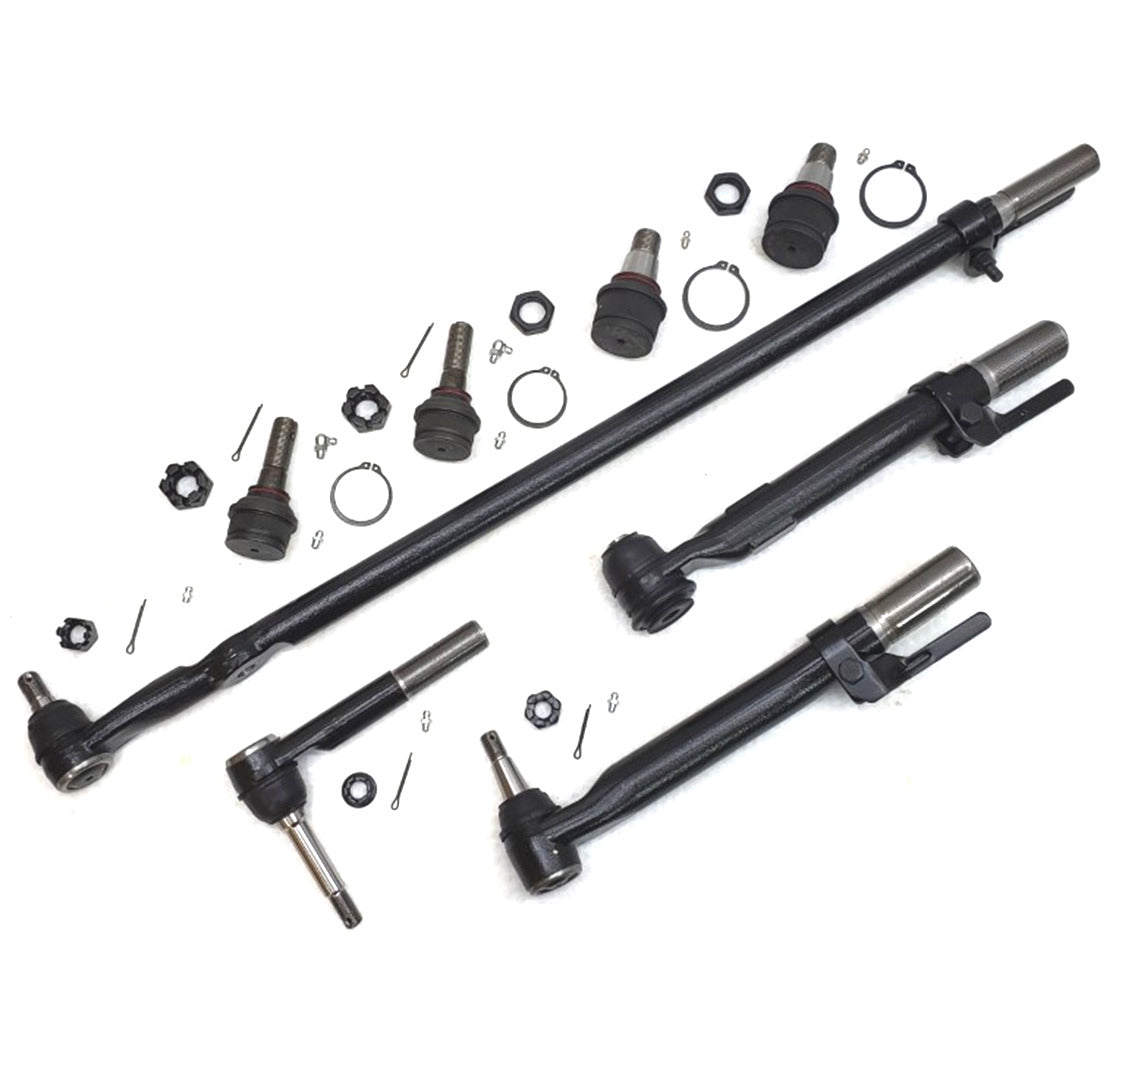 XRF Ball Joint Tie Rod Drag Link Kit for 2008-2010 Ford F250, F350 Super Duty 4x4